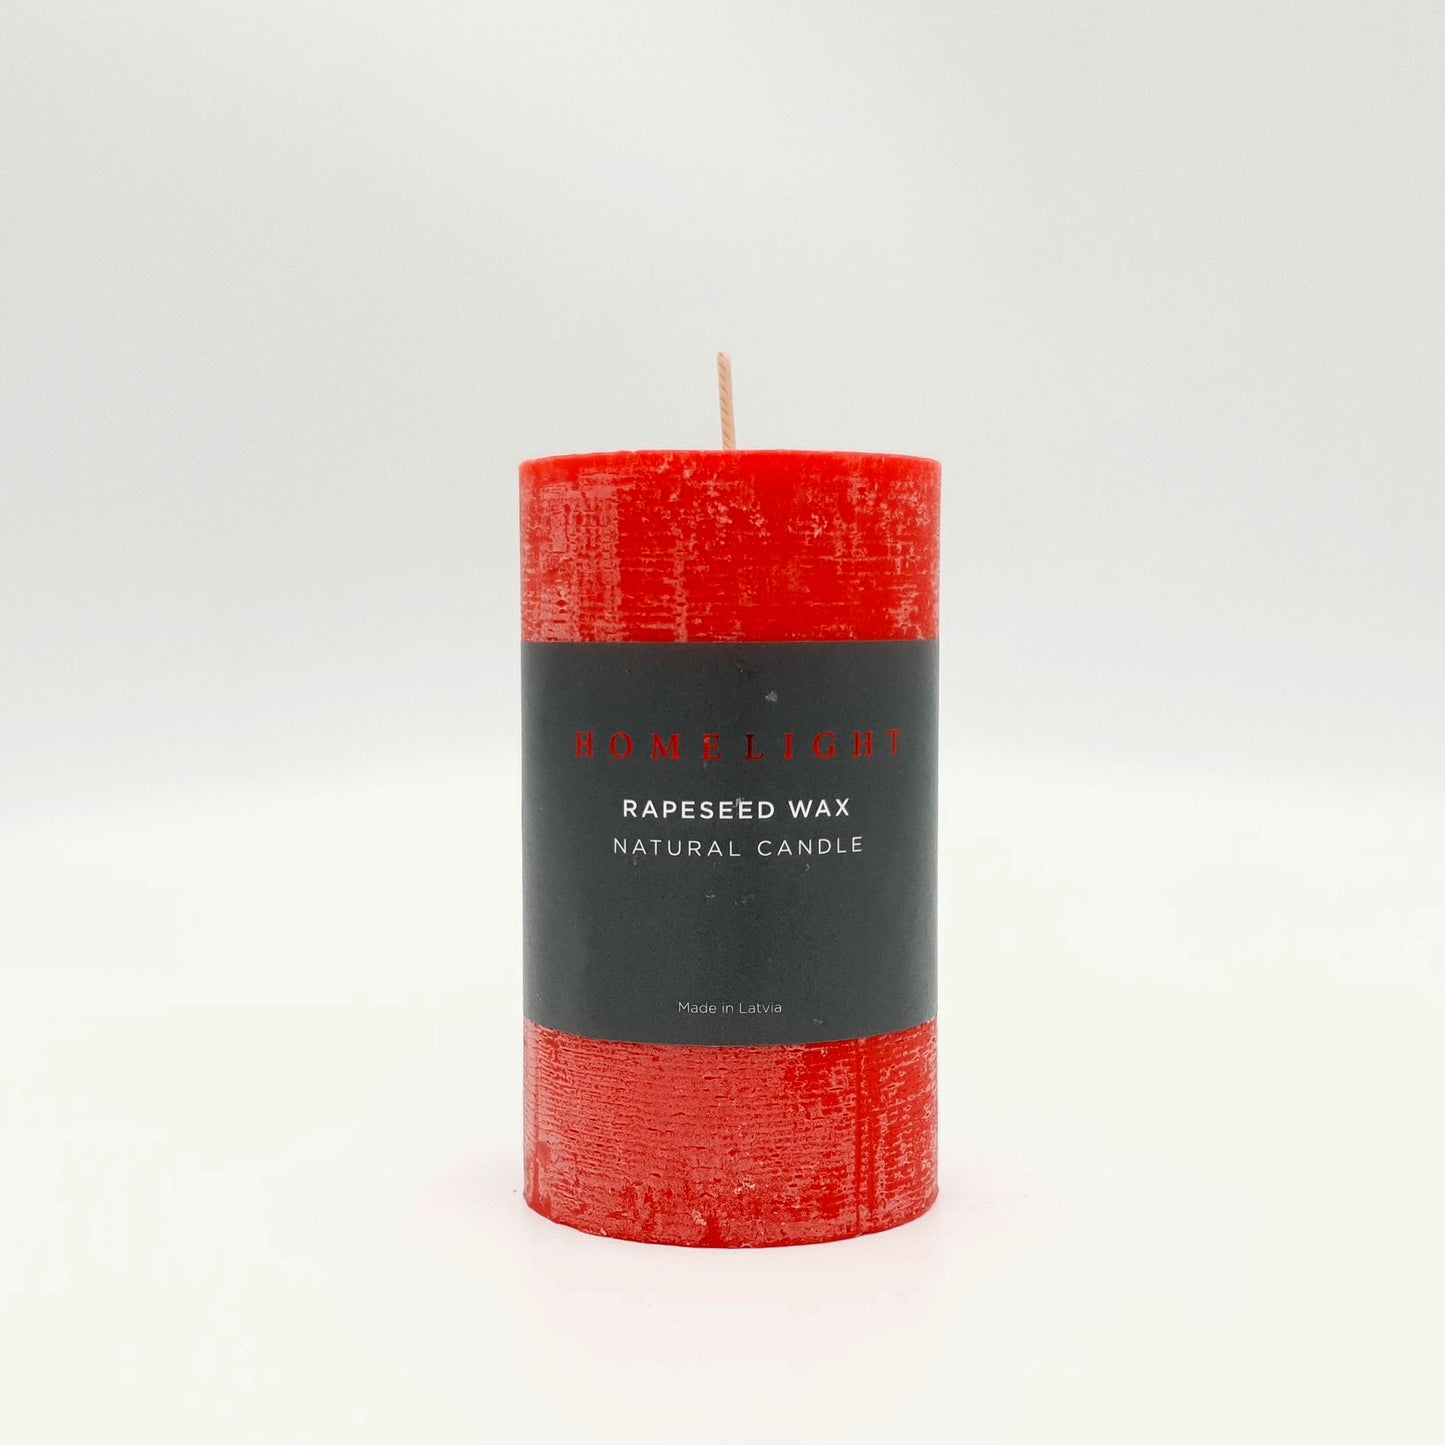 Rapeseed wax candle ⌀ 7x12 cm, red